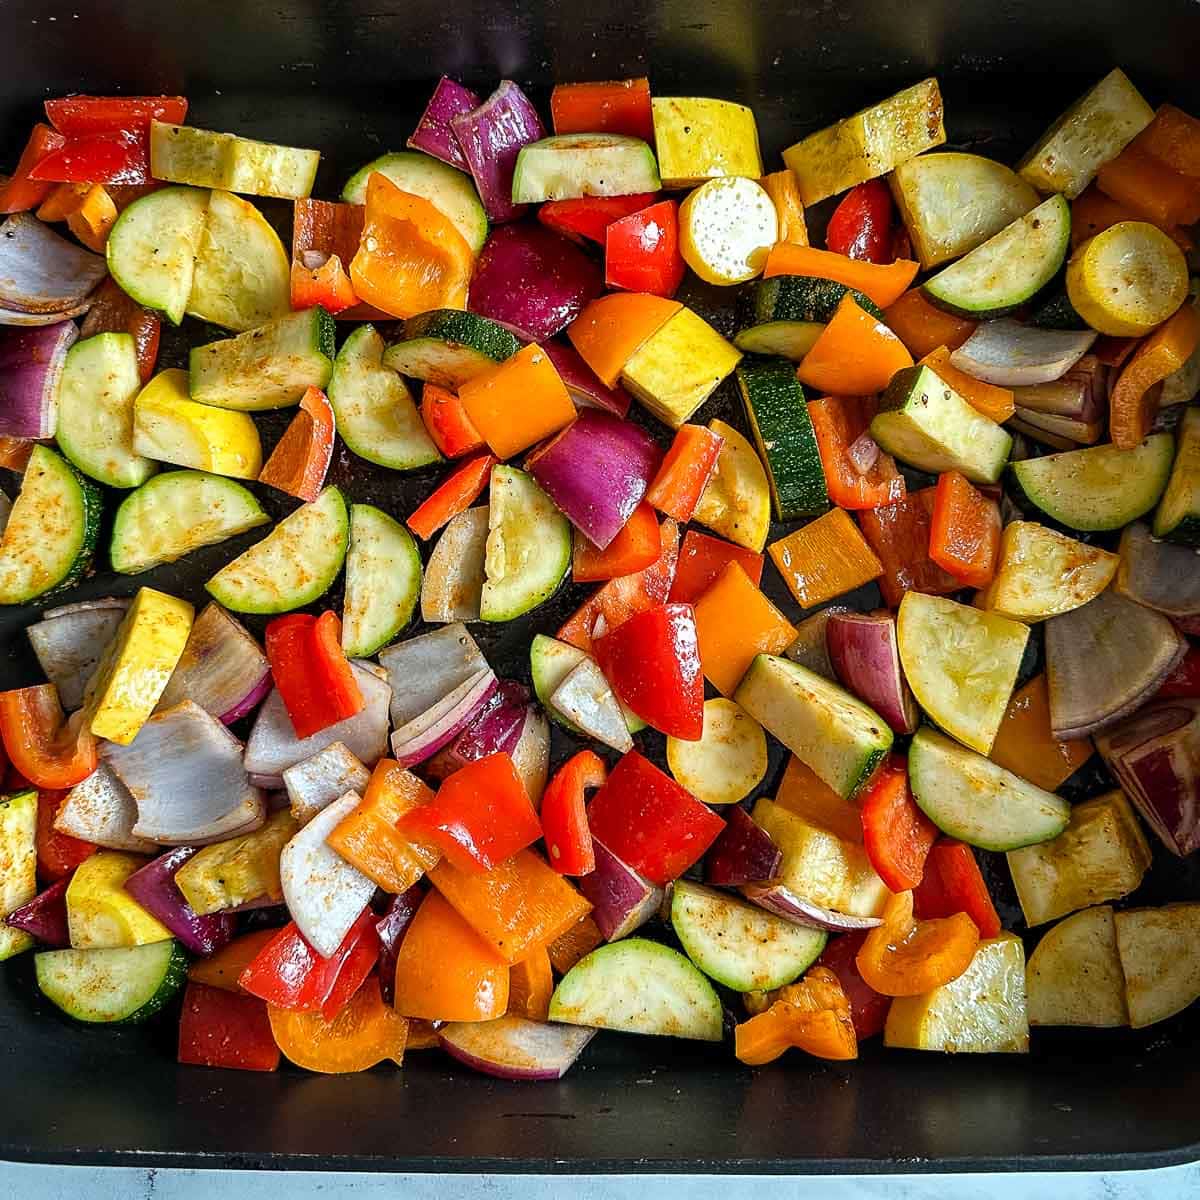 Cut and seasoned vegetables are shown in a roasting pan.